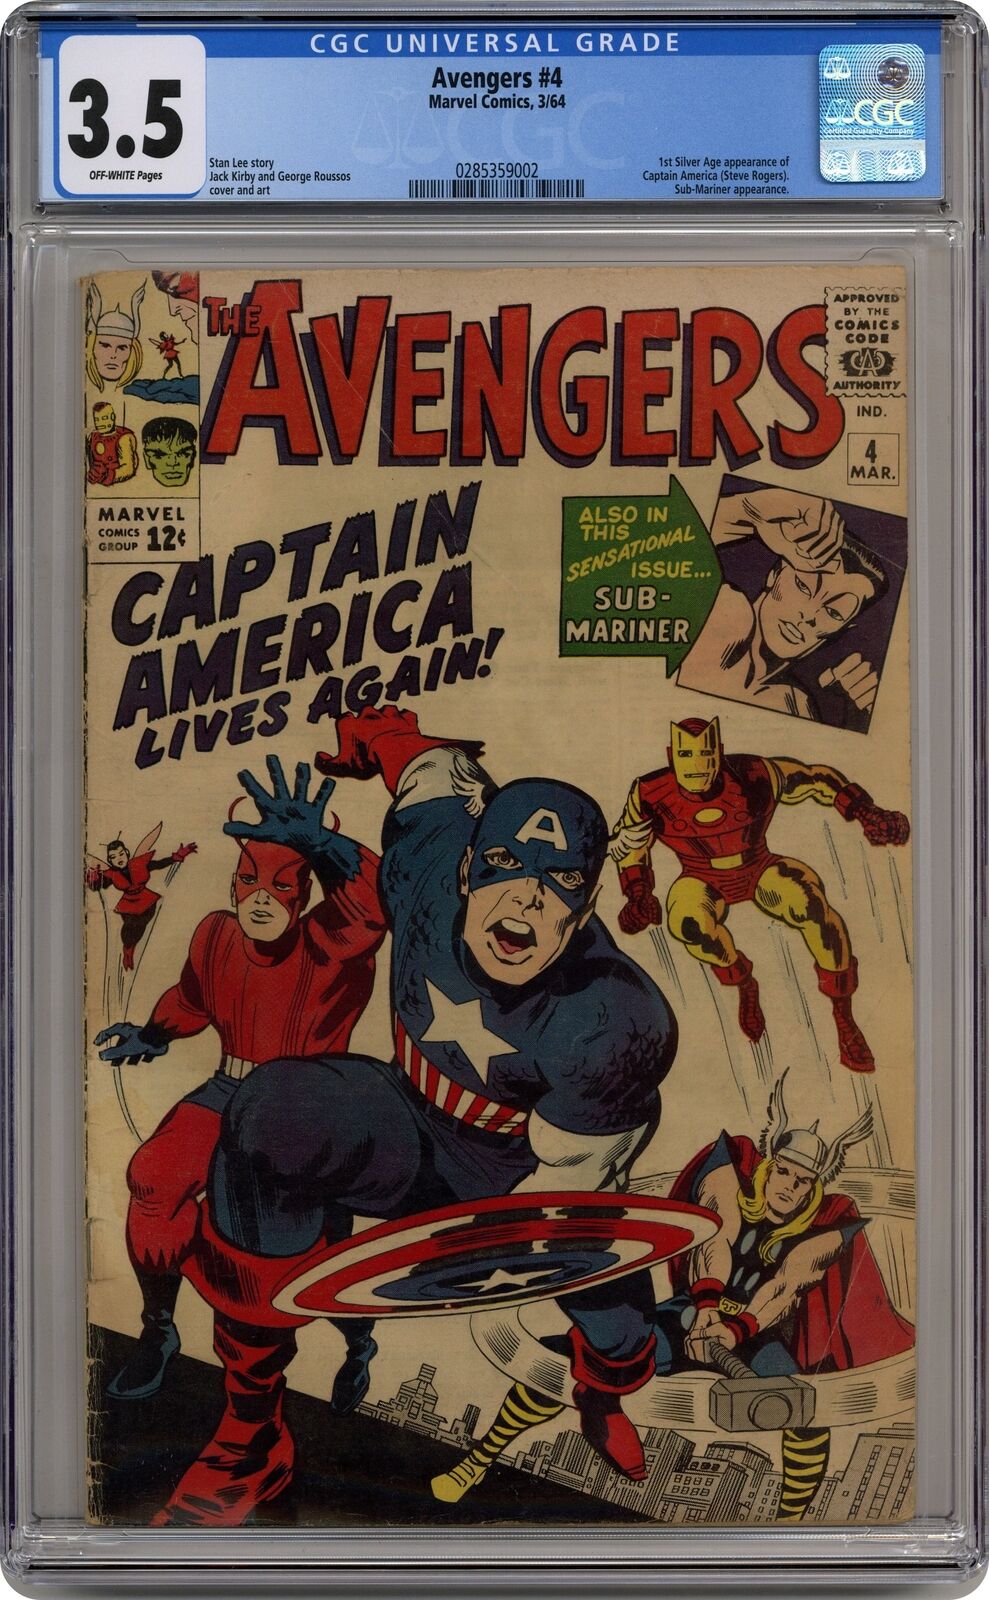 Avengers #4 CGC 3.5 1964 0285359002 1st Silver Age Captain America and Bucky